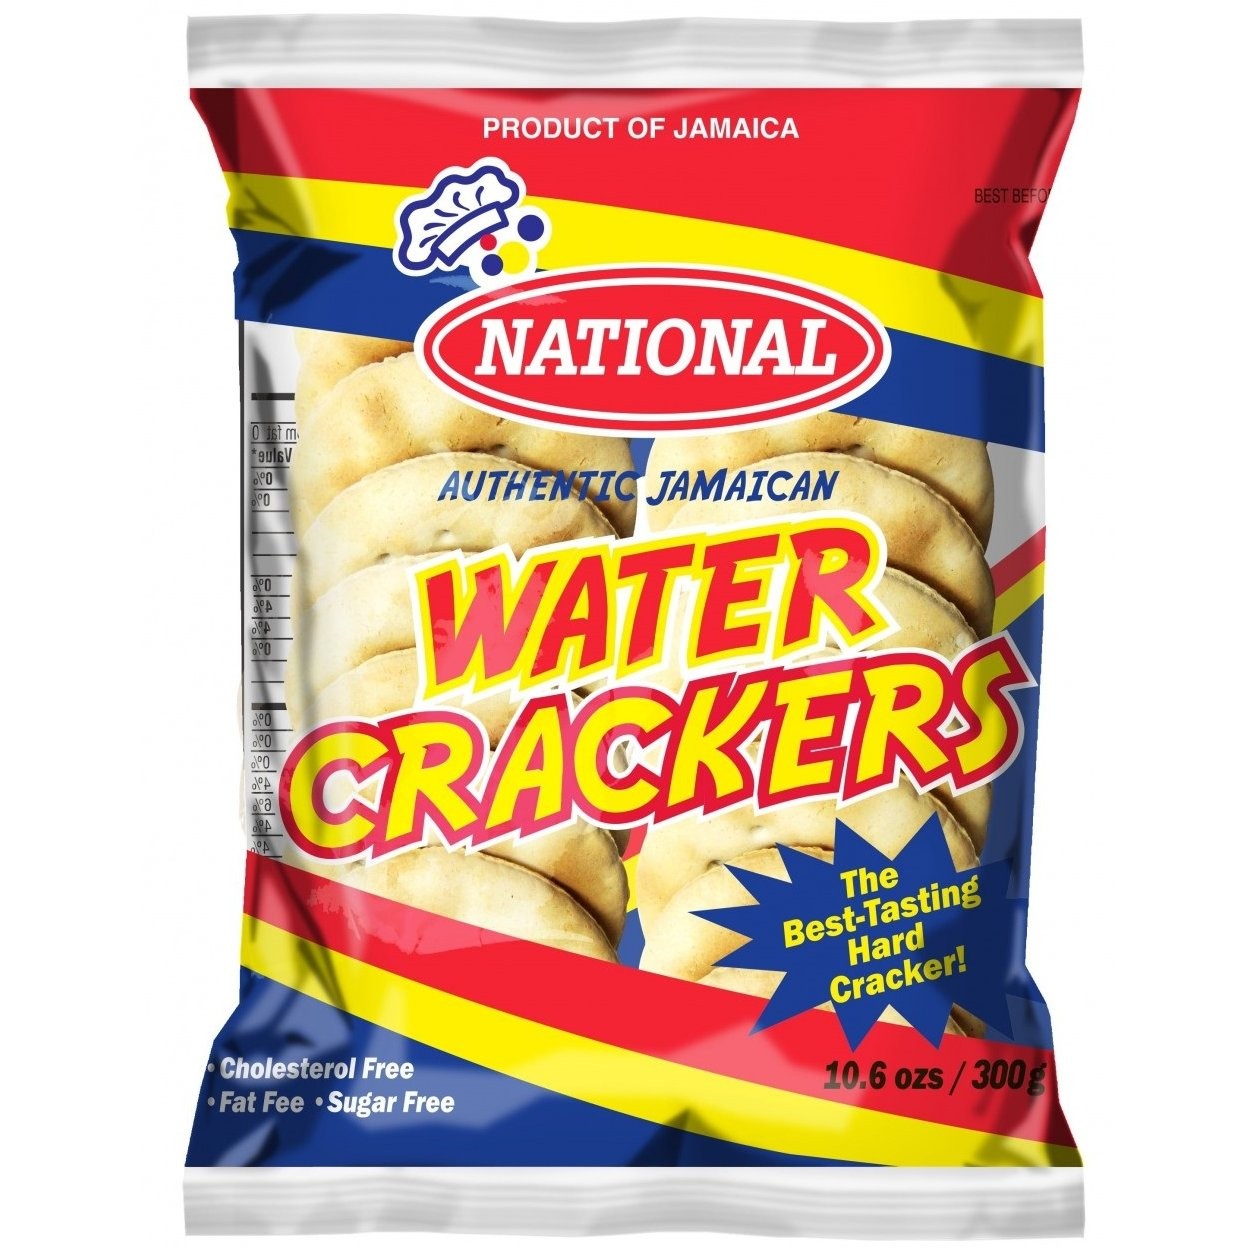 NATIONAL CRACKERS WATER 336g